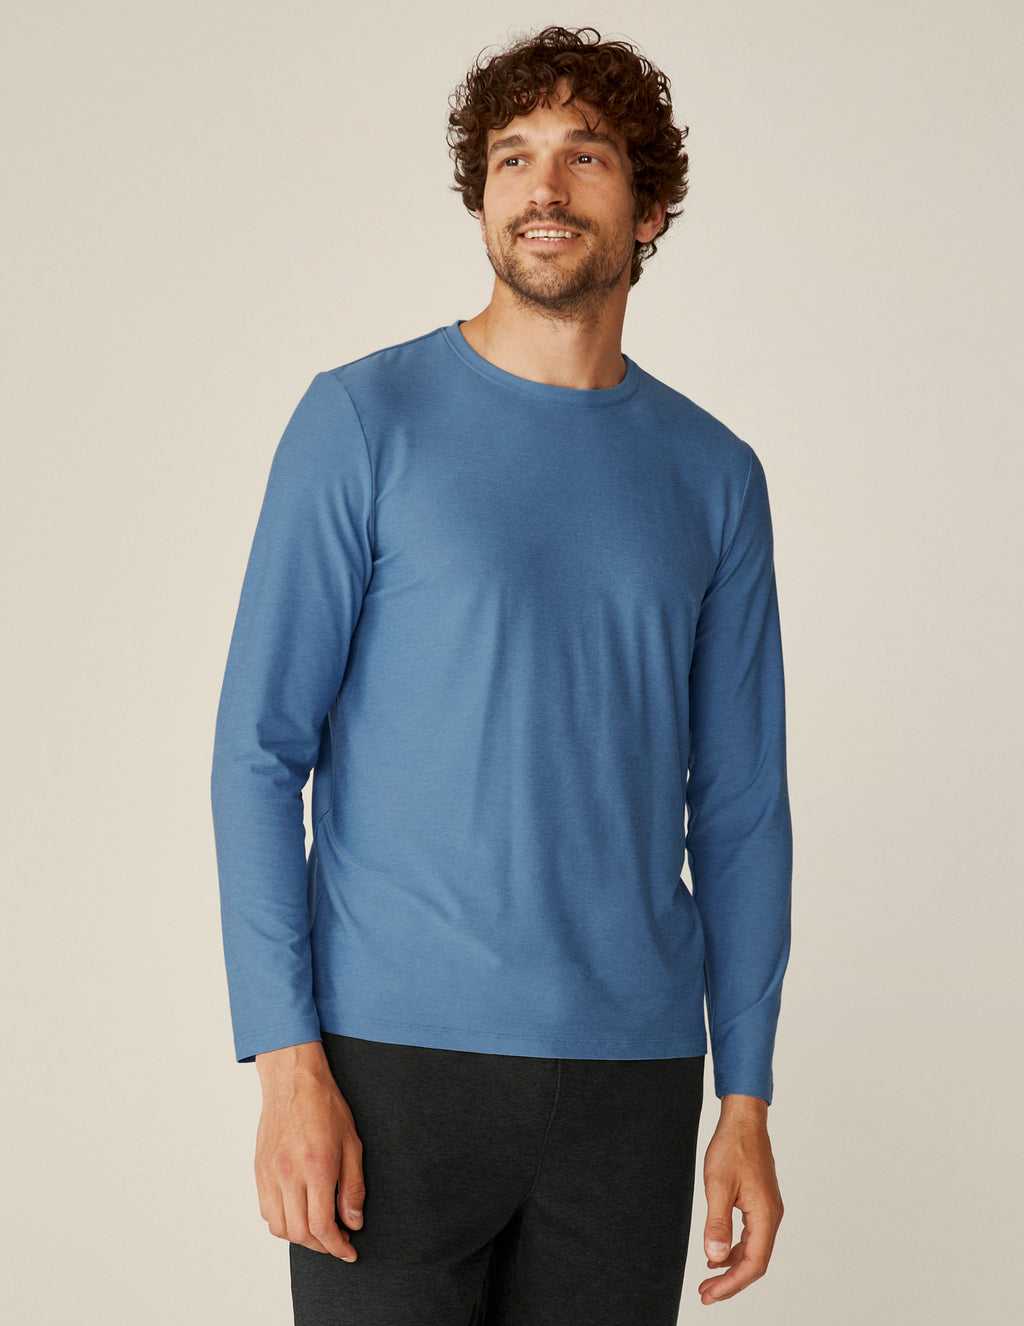 Beyond Yoga Wrap Party Long Sleeve Top - Heather